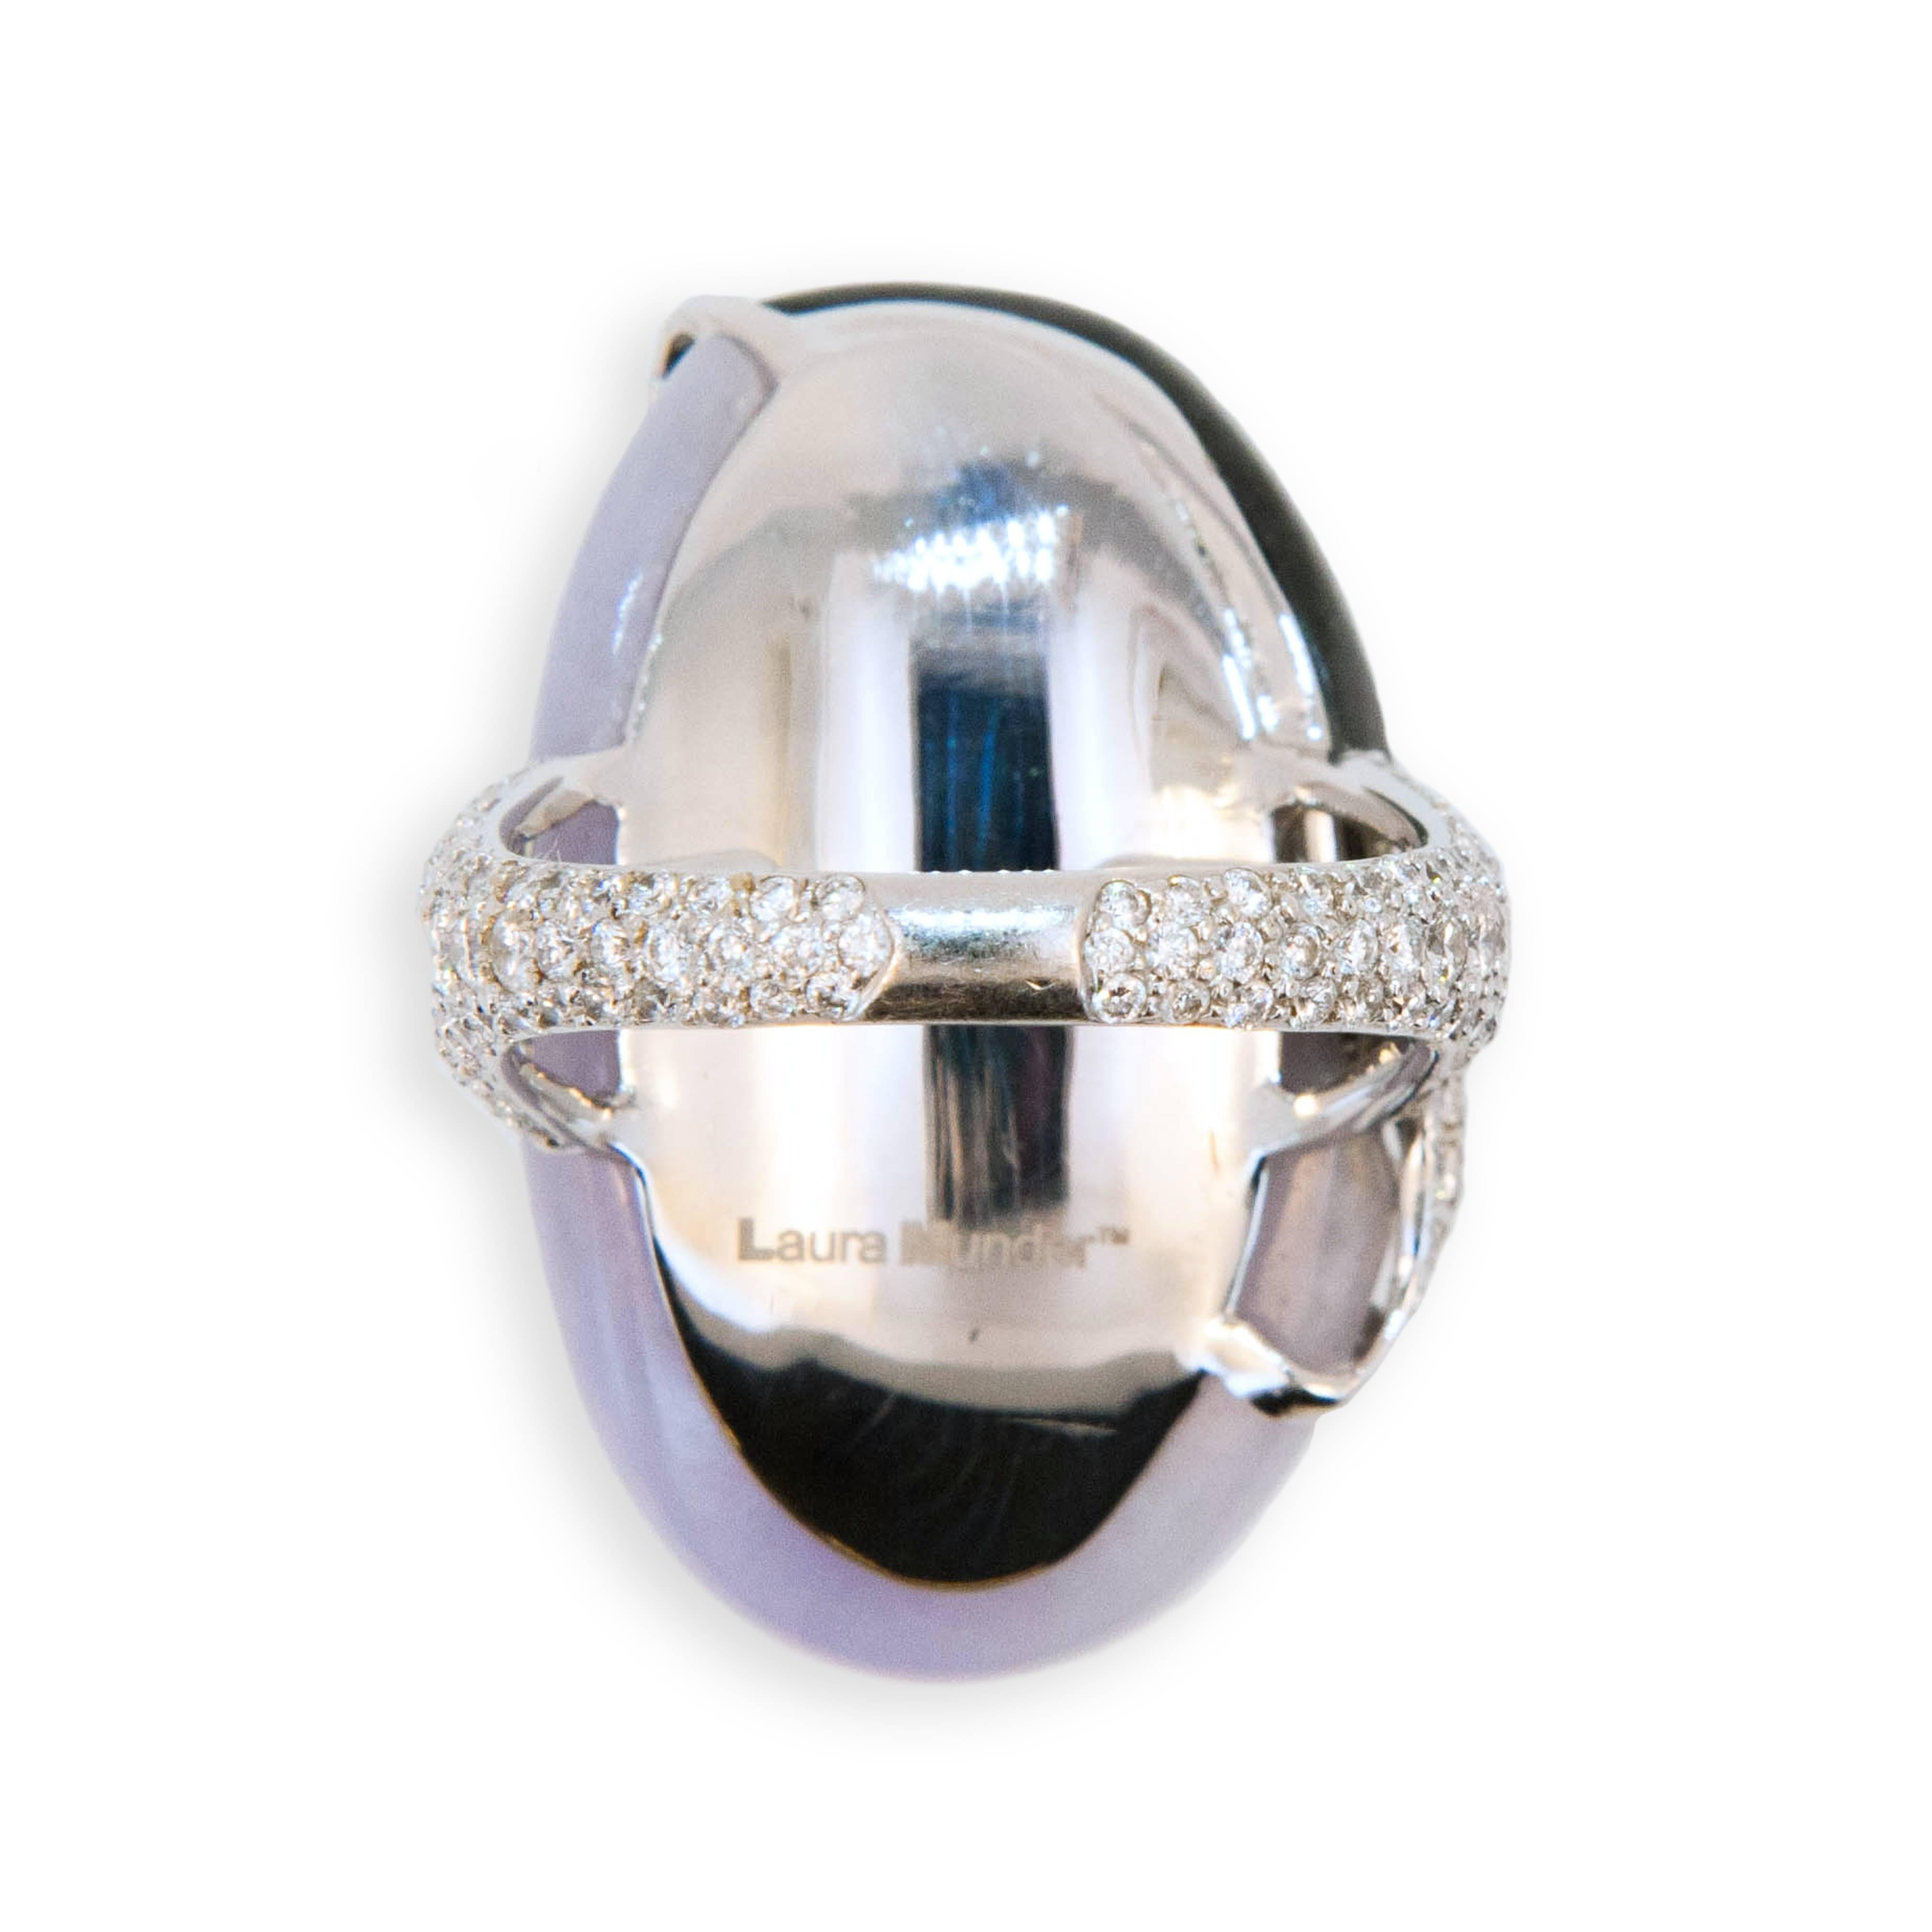 18 karat white gold ring oval curved Lavender and Black Jade with raised flower and leaf design set with diamonds, shank is pave' set with diamonds 143 diamonds 2.10 carats total weight.  Size 7 plus with a horseshoe.